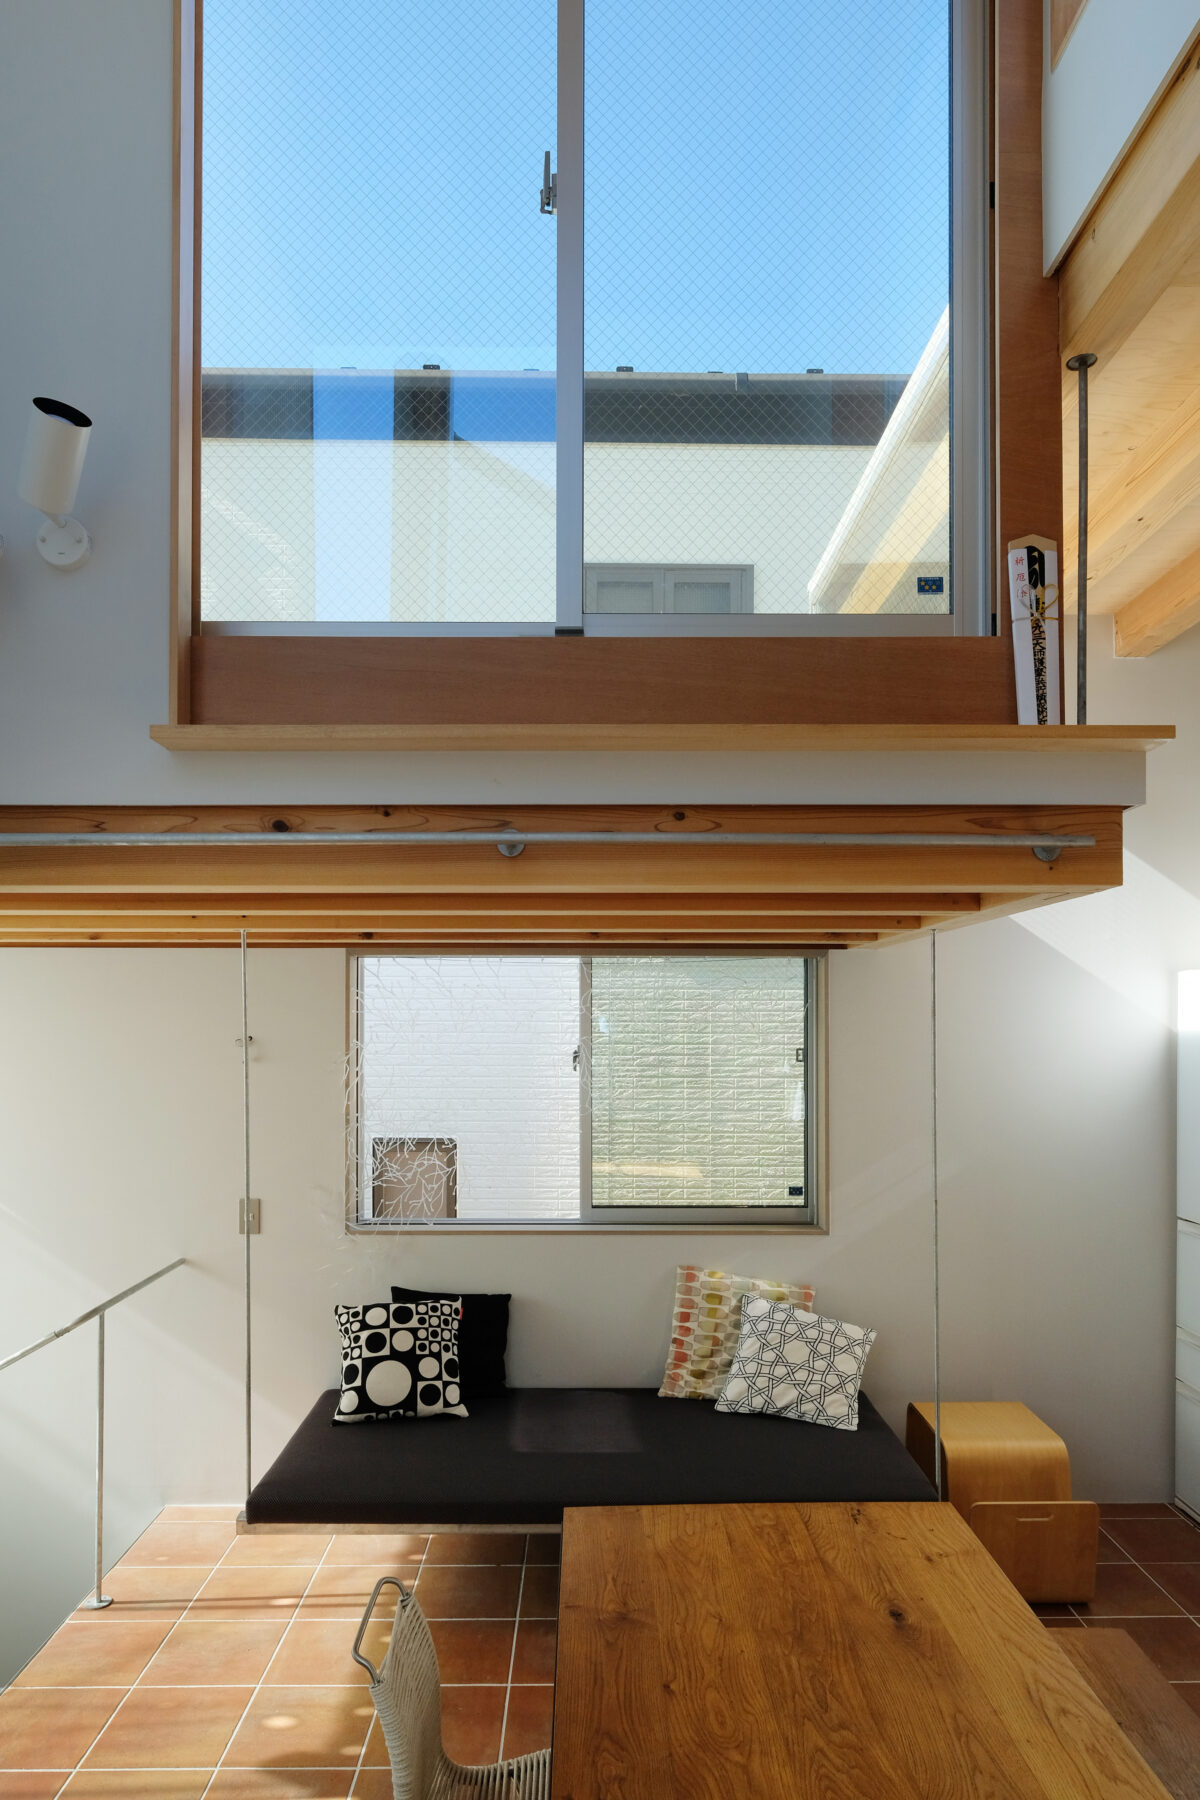 Archisearch UNEMORI ARCHITECTS completes compact House Tokyo with footprint of 26m2